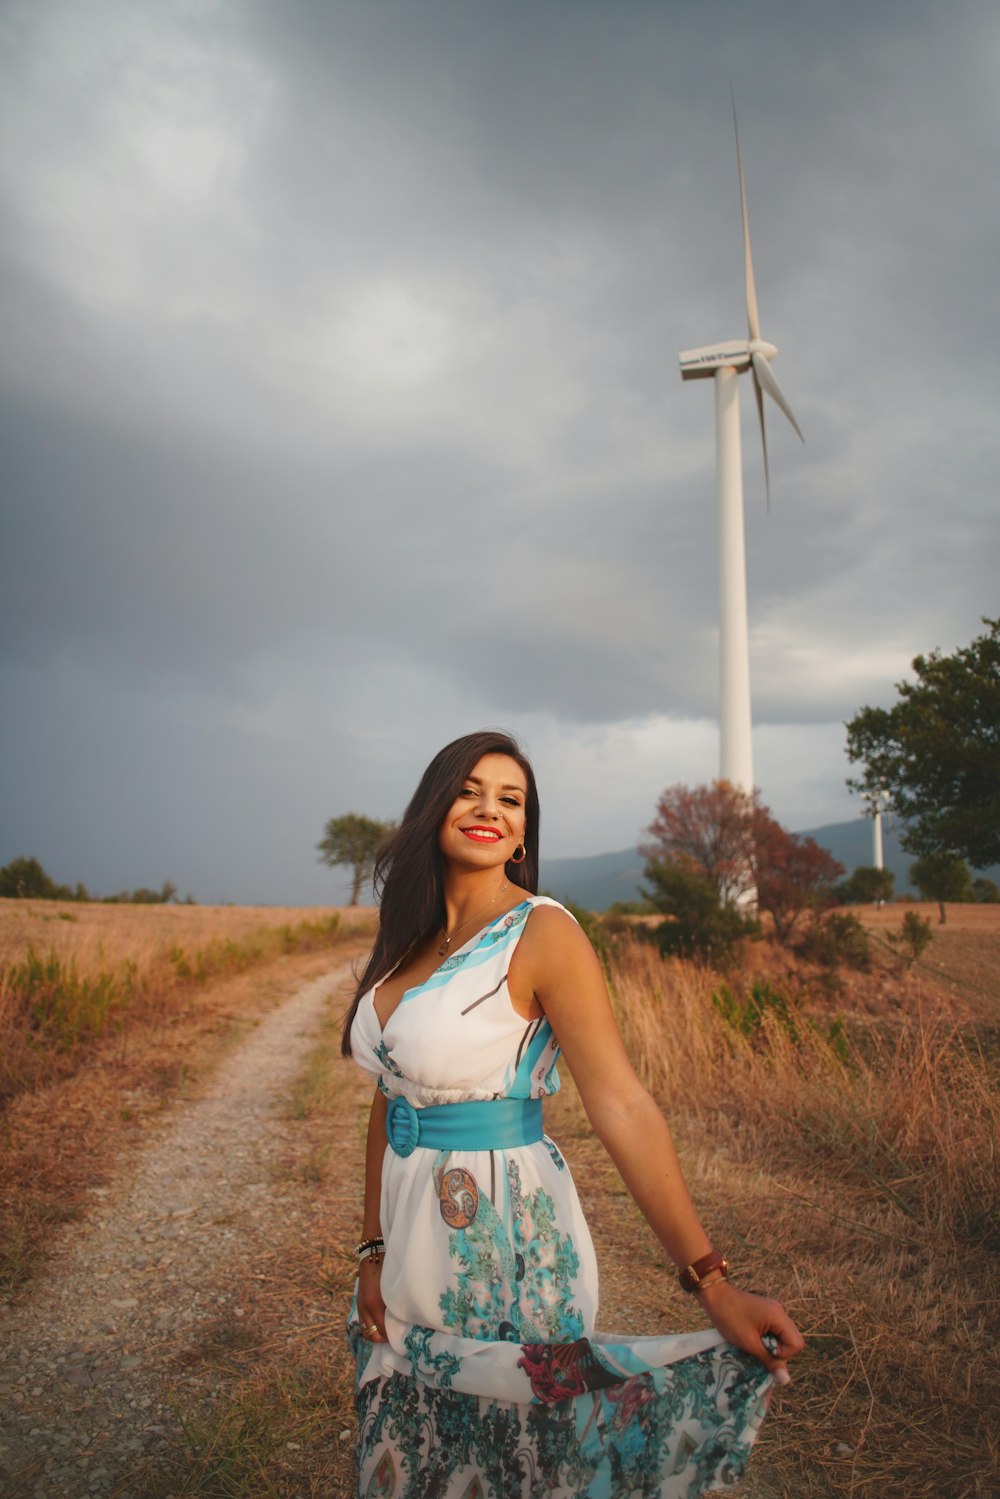 woman in white and blue floral sleeveless dress standing near white wind mill under gray cloudy